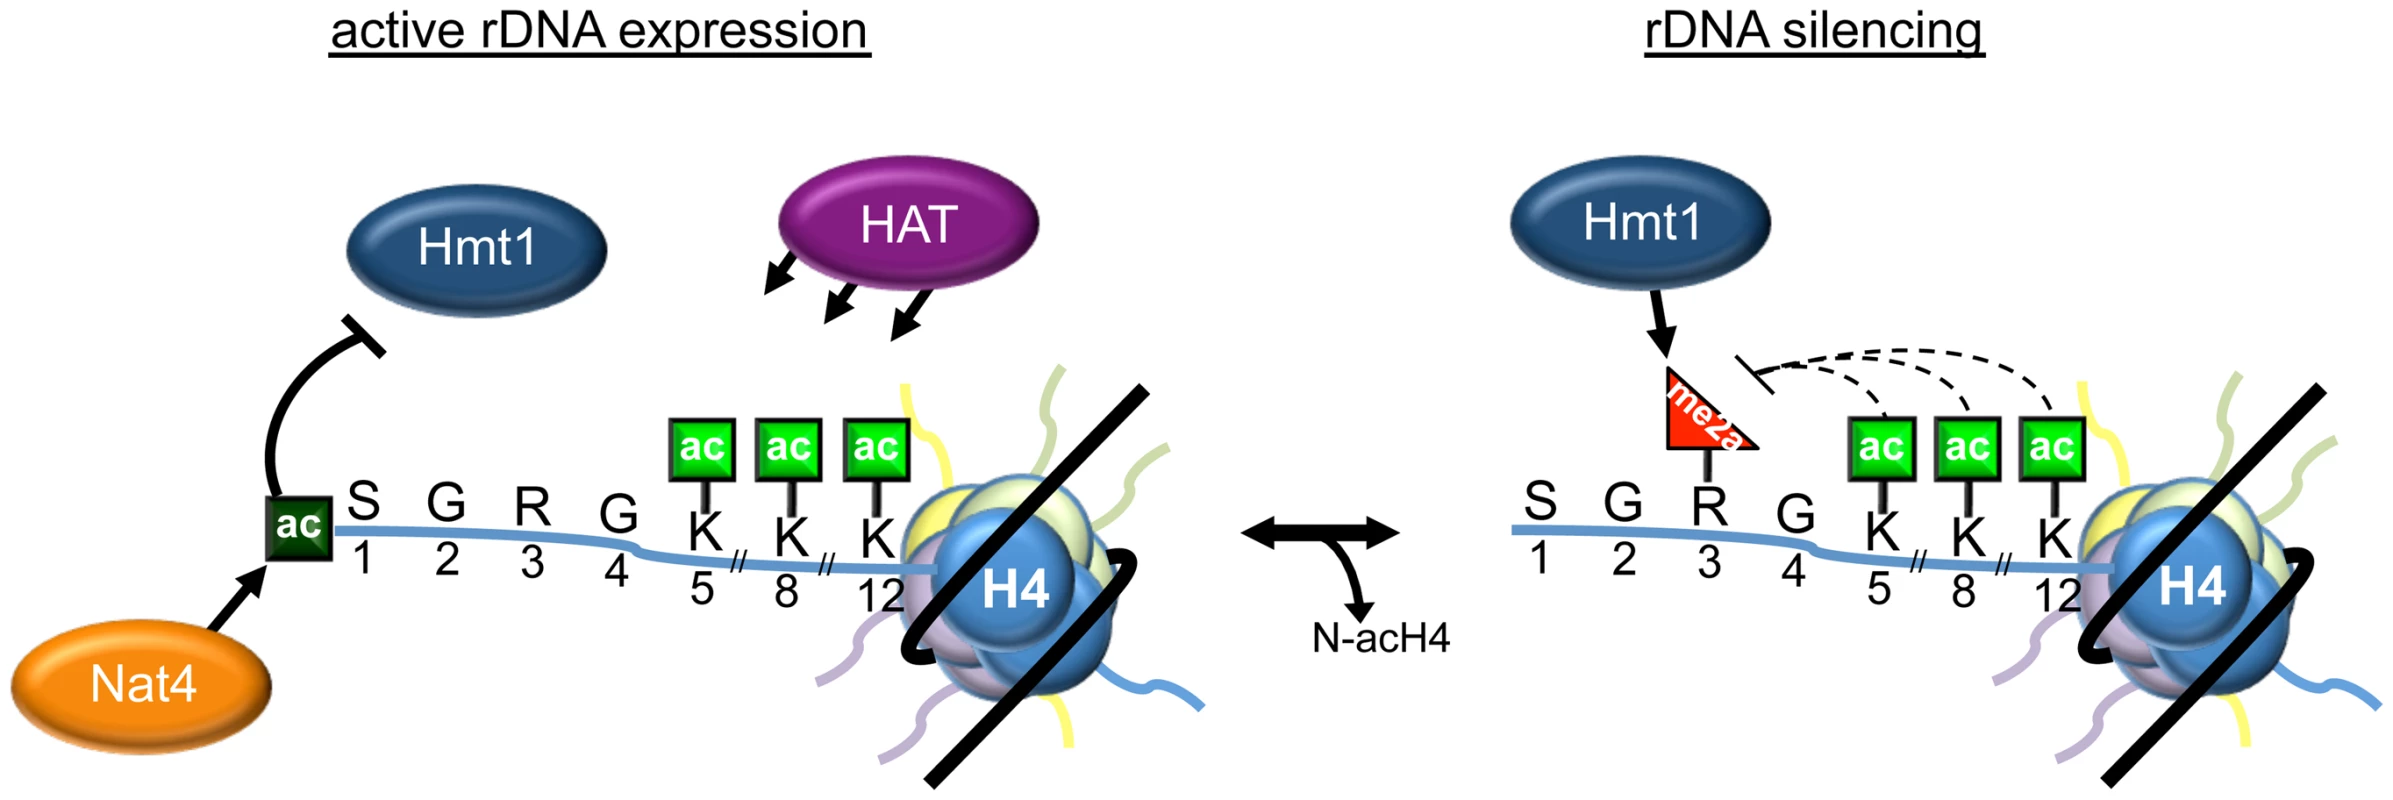 Model depicting the role of N-acH4 in rDNA silencing.